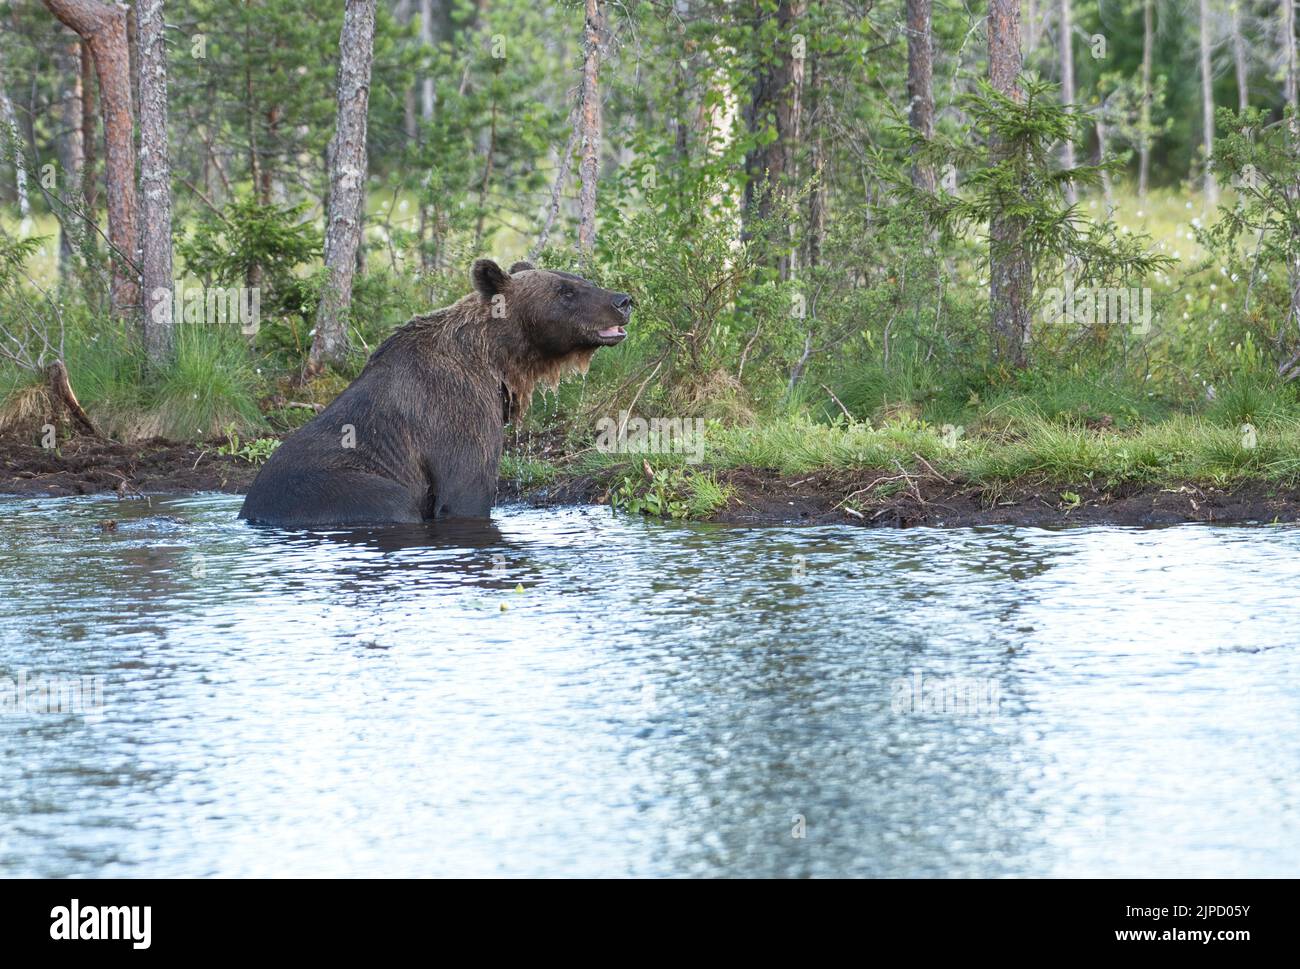 Brown bear (Ursus arctos) emerging after a swim in a lake in a clearing in the Finnish Taiga or boreal forest Stock Photo